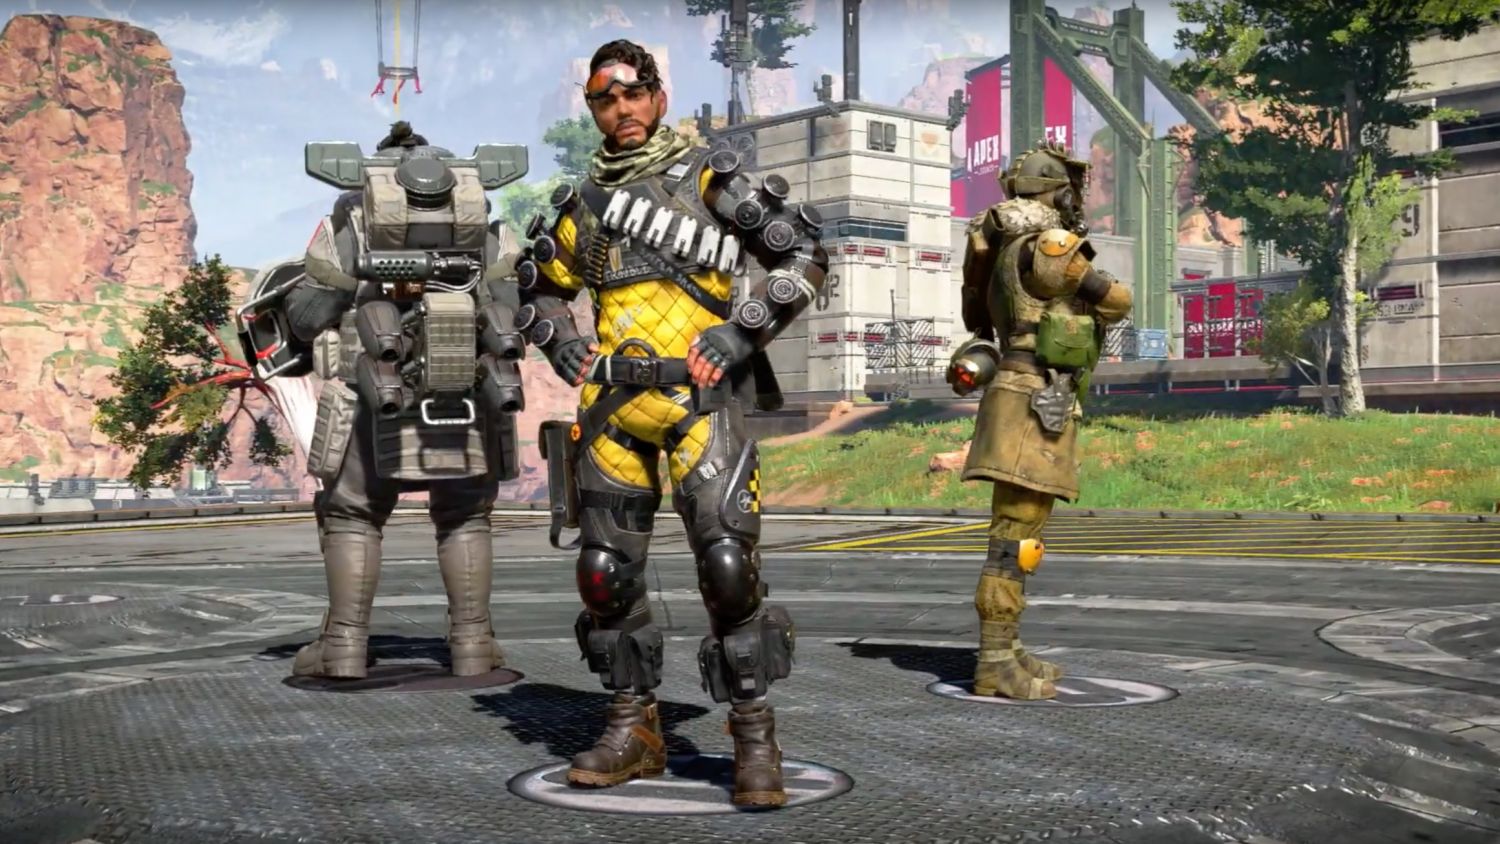 Apex Legends Mobile Now Available for Download in the Philippines